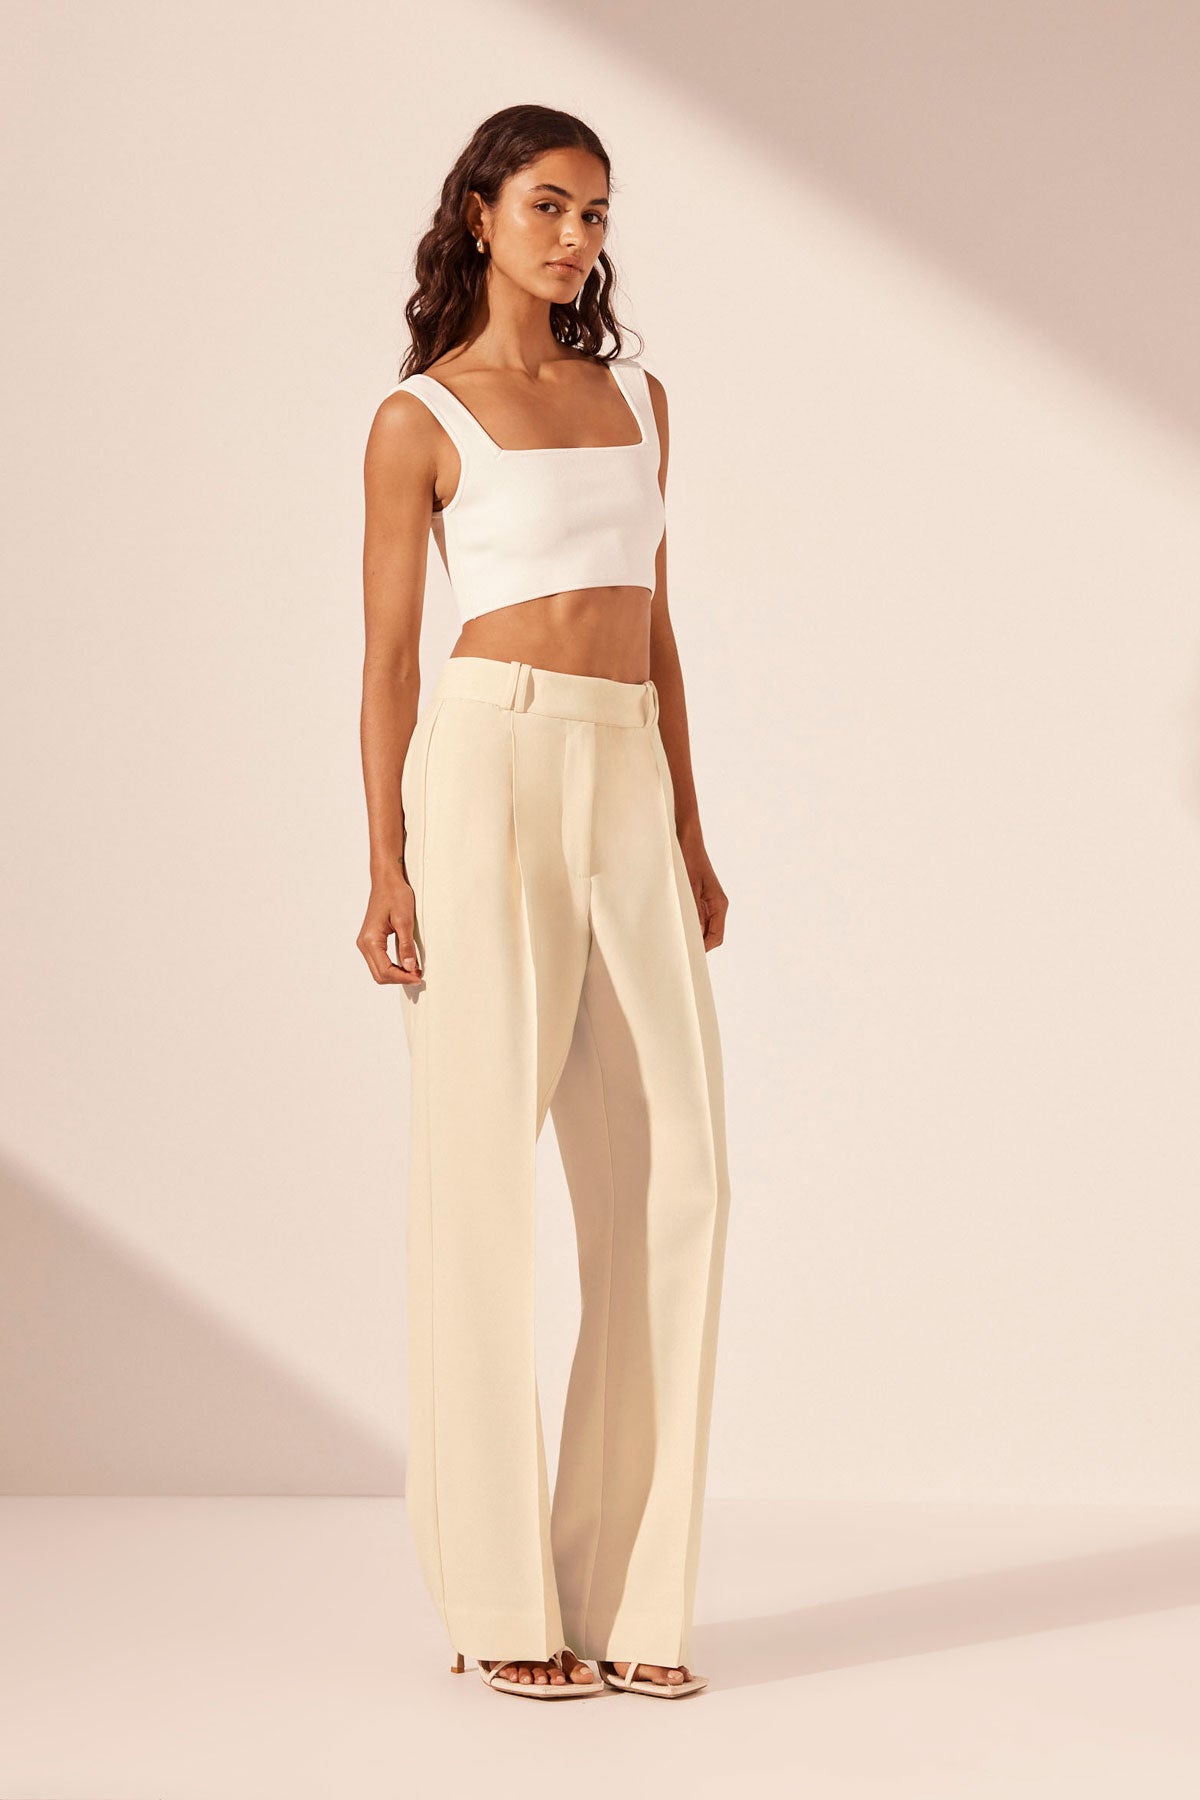 Buy Brown Linen Square Neck Sleeveless Crop Top And Pant Set For